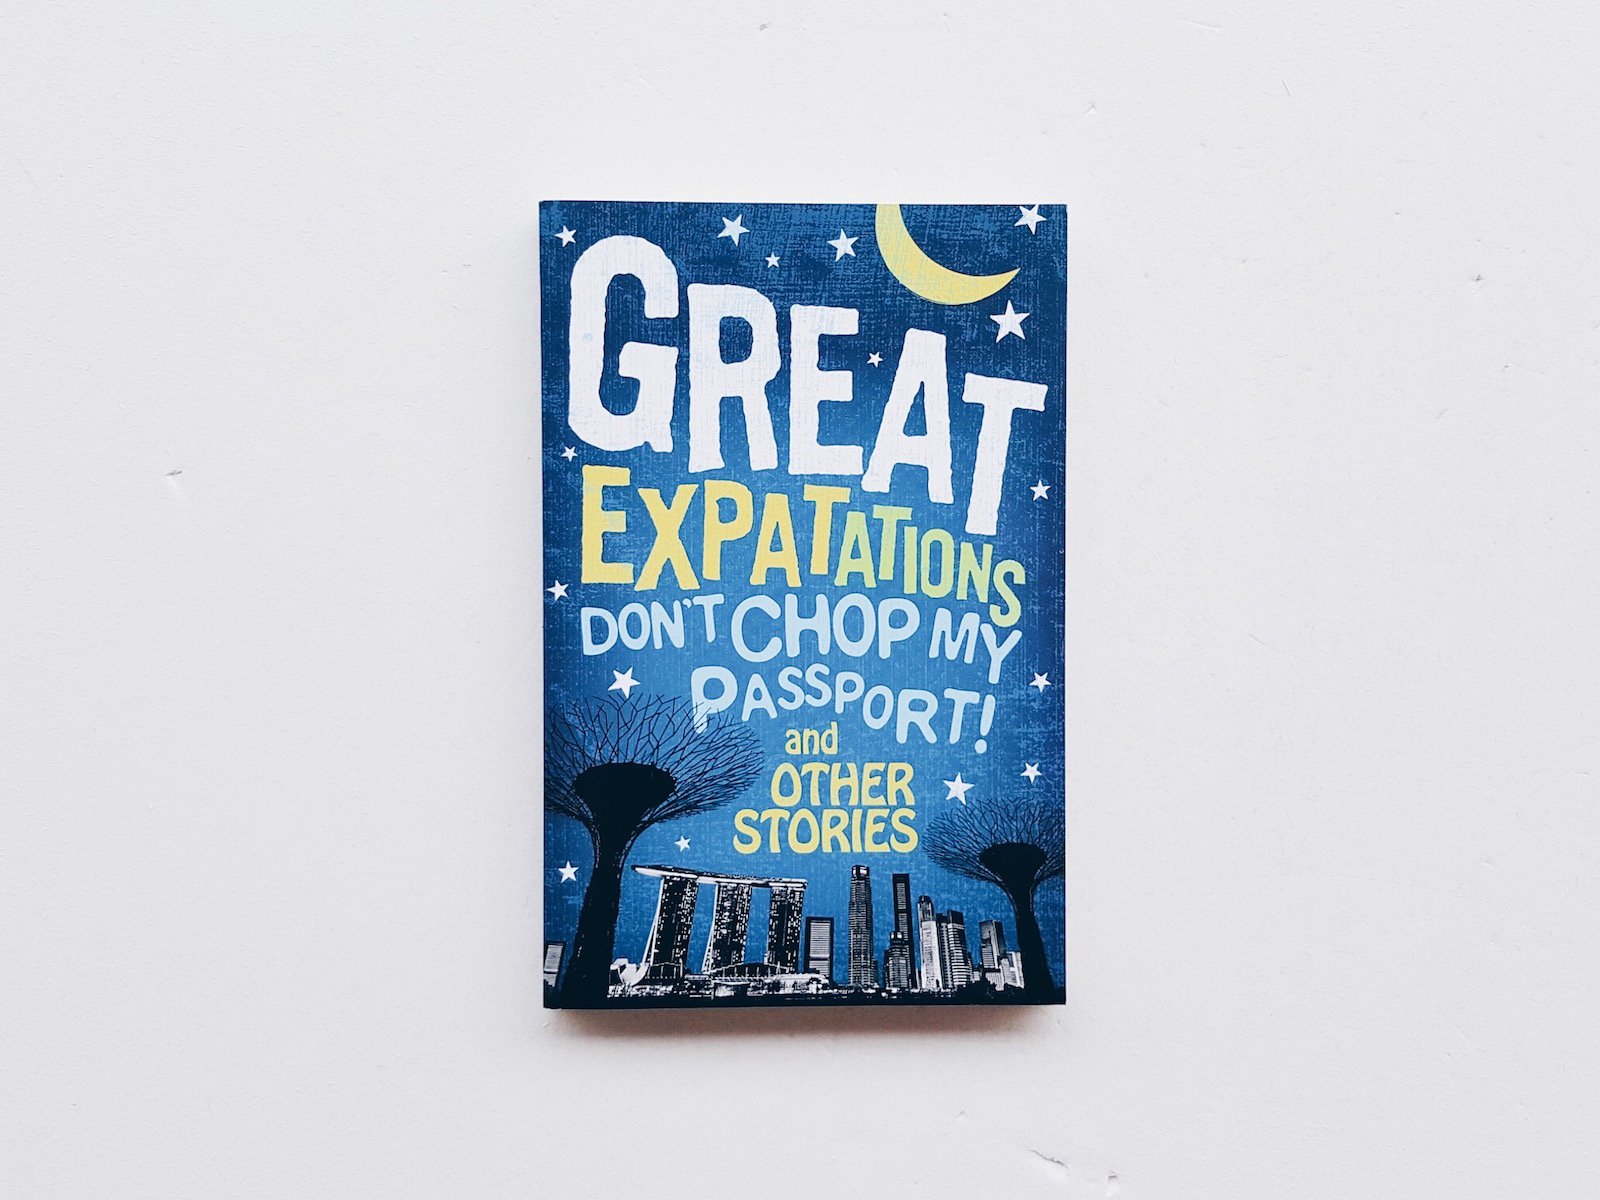 Great Expatations: Don't Chop My Passport and other stories